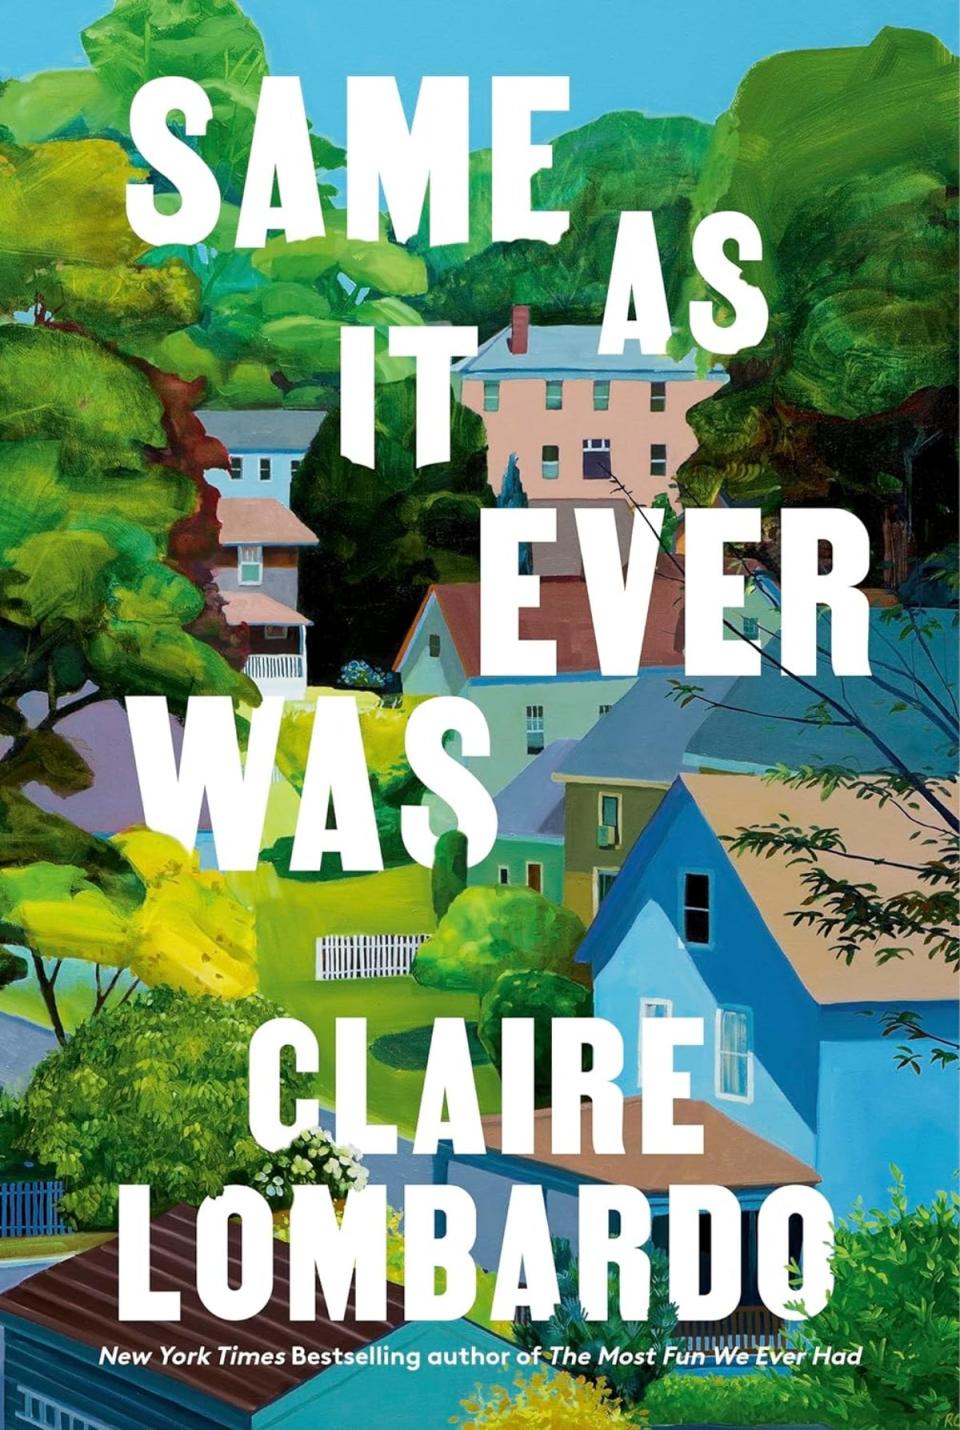 Claire Lombardo’s second book is a family saga about a teenage daughter about to set off for college